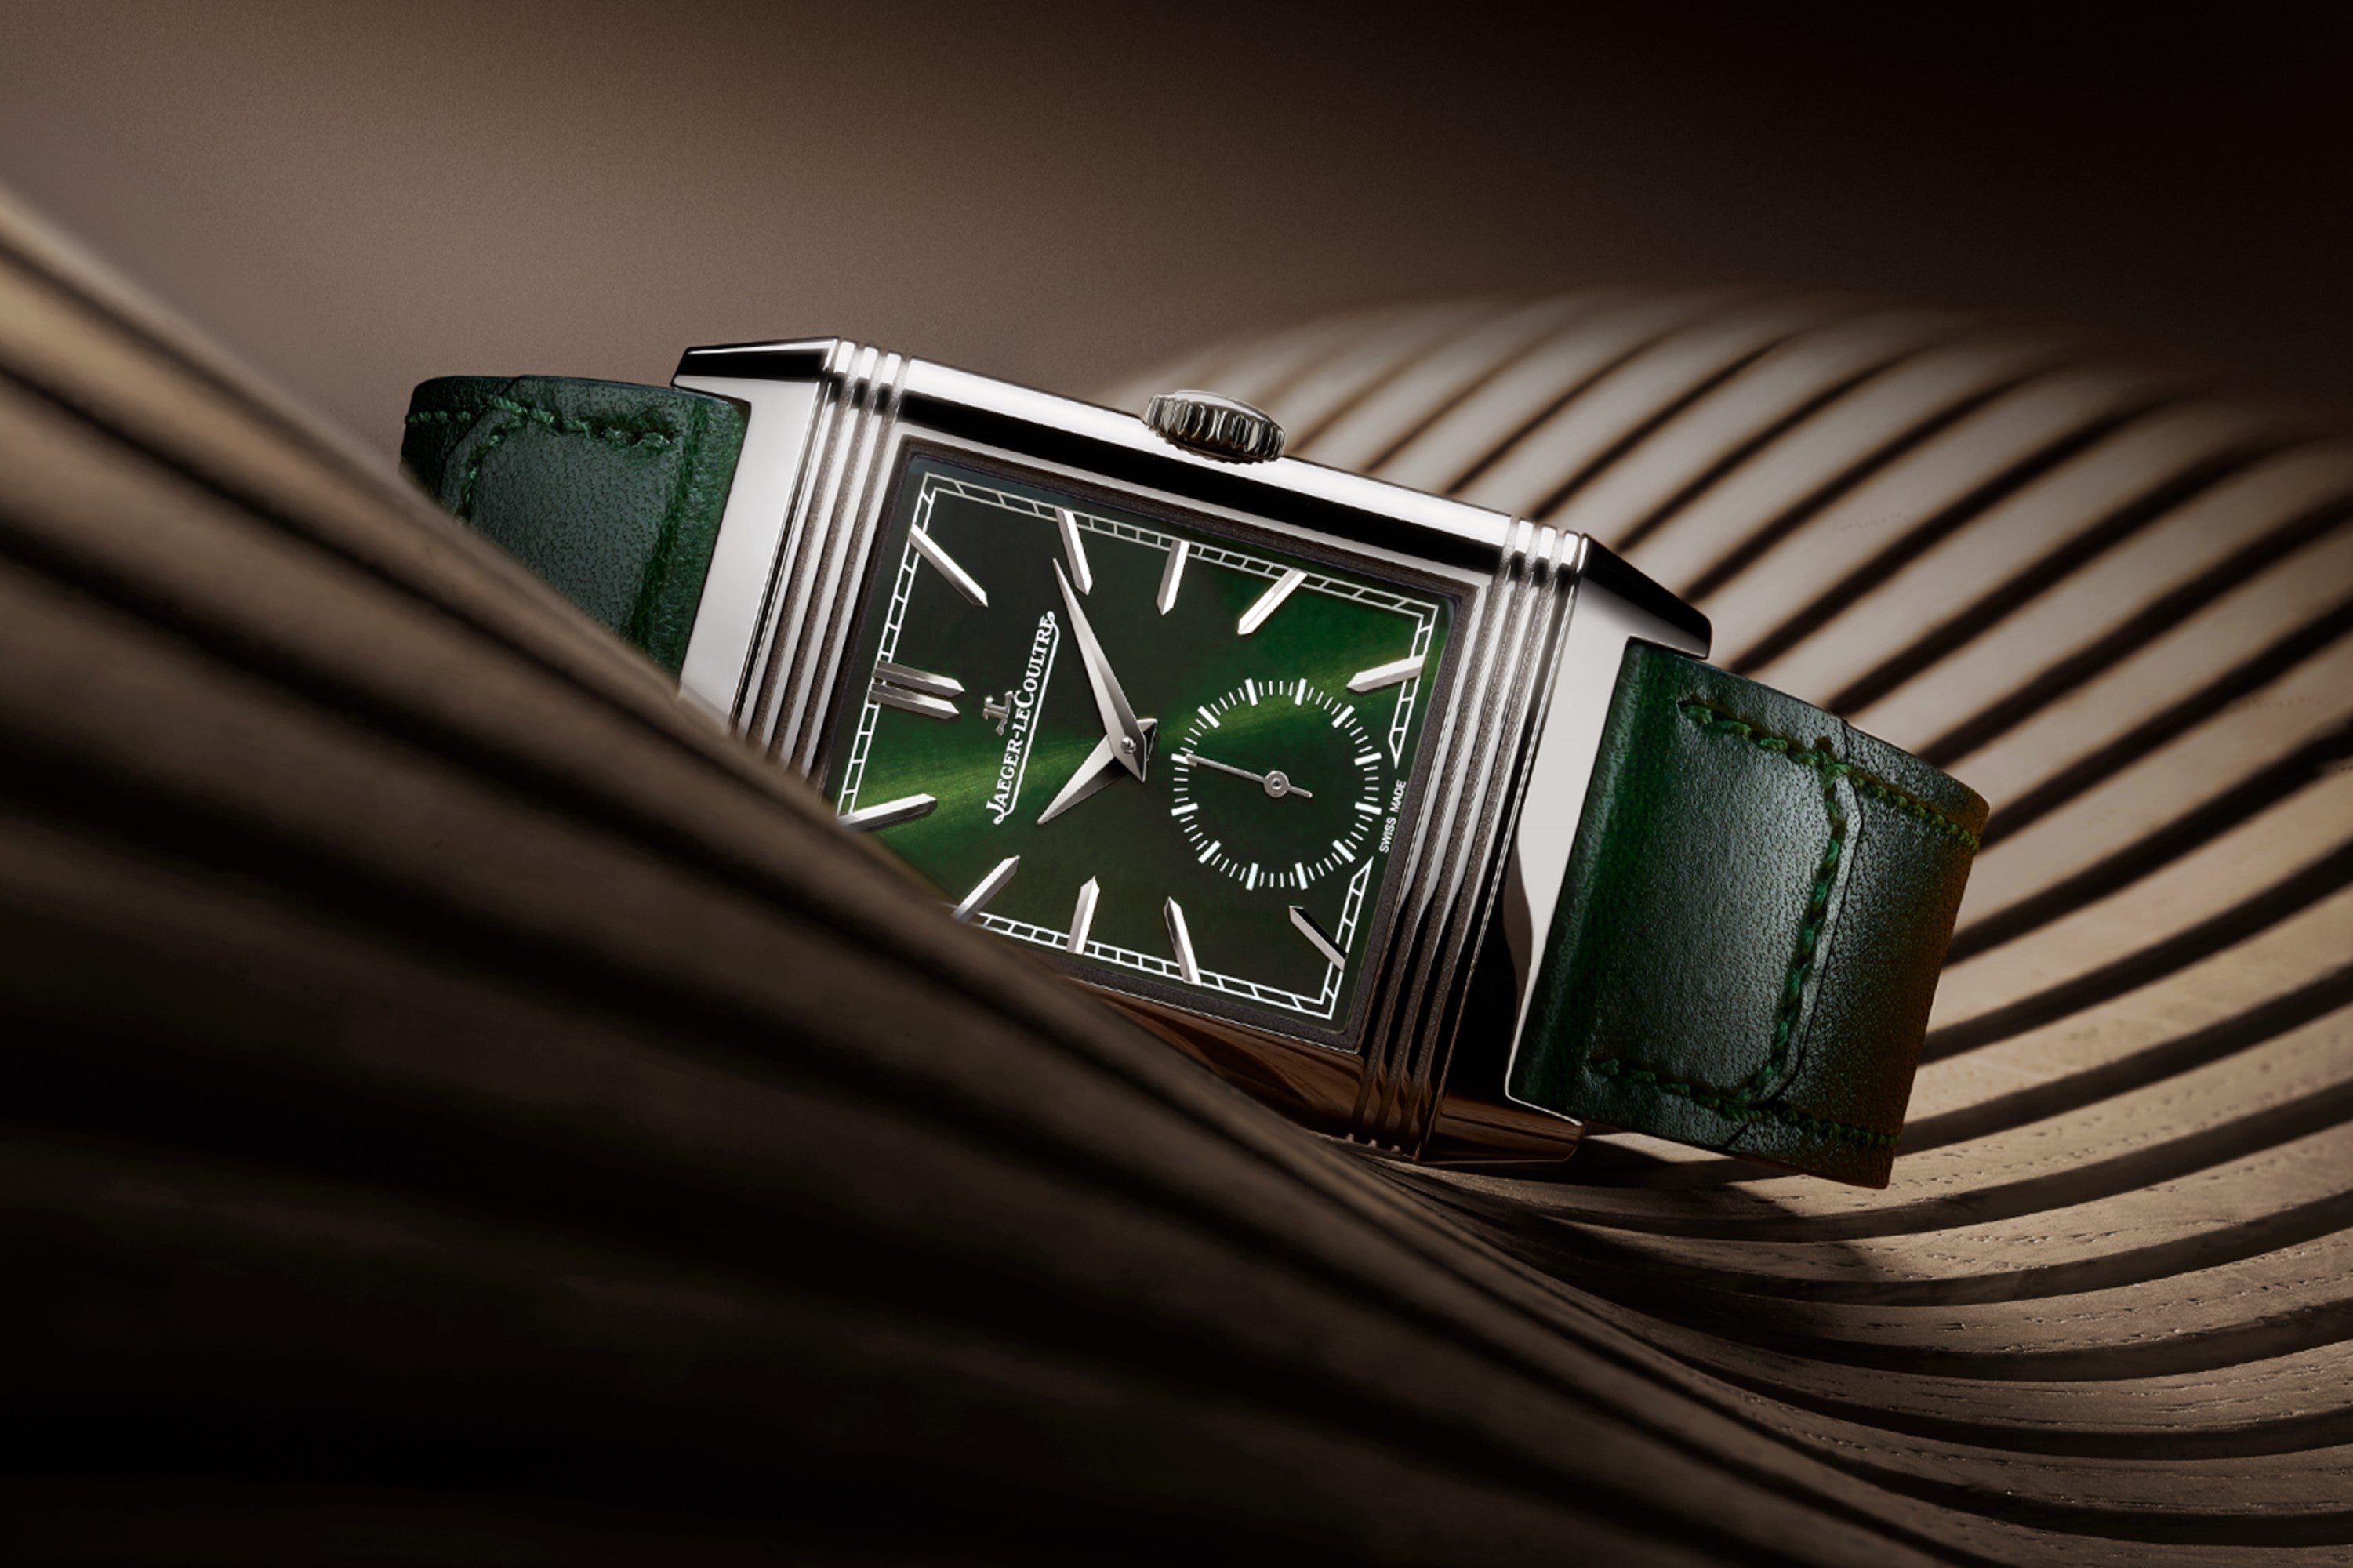 The Jaeger-LeCoultre Reverso Tribute Small Seconds in Green